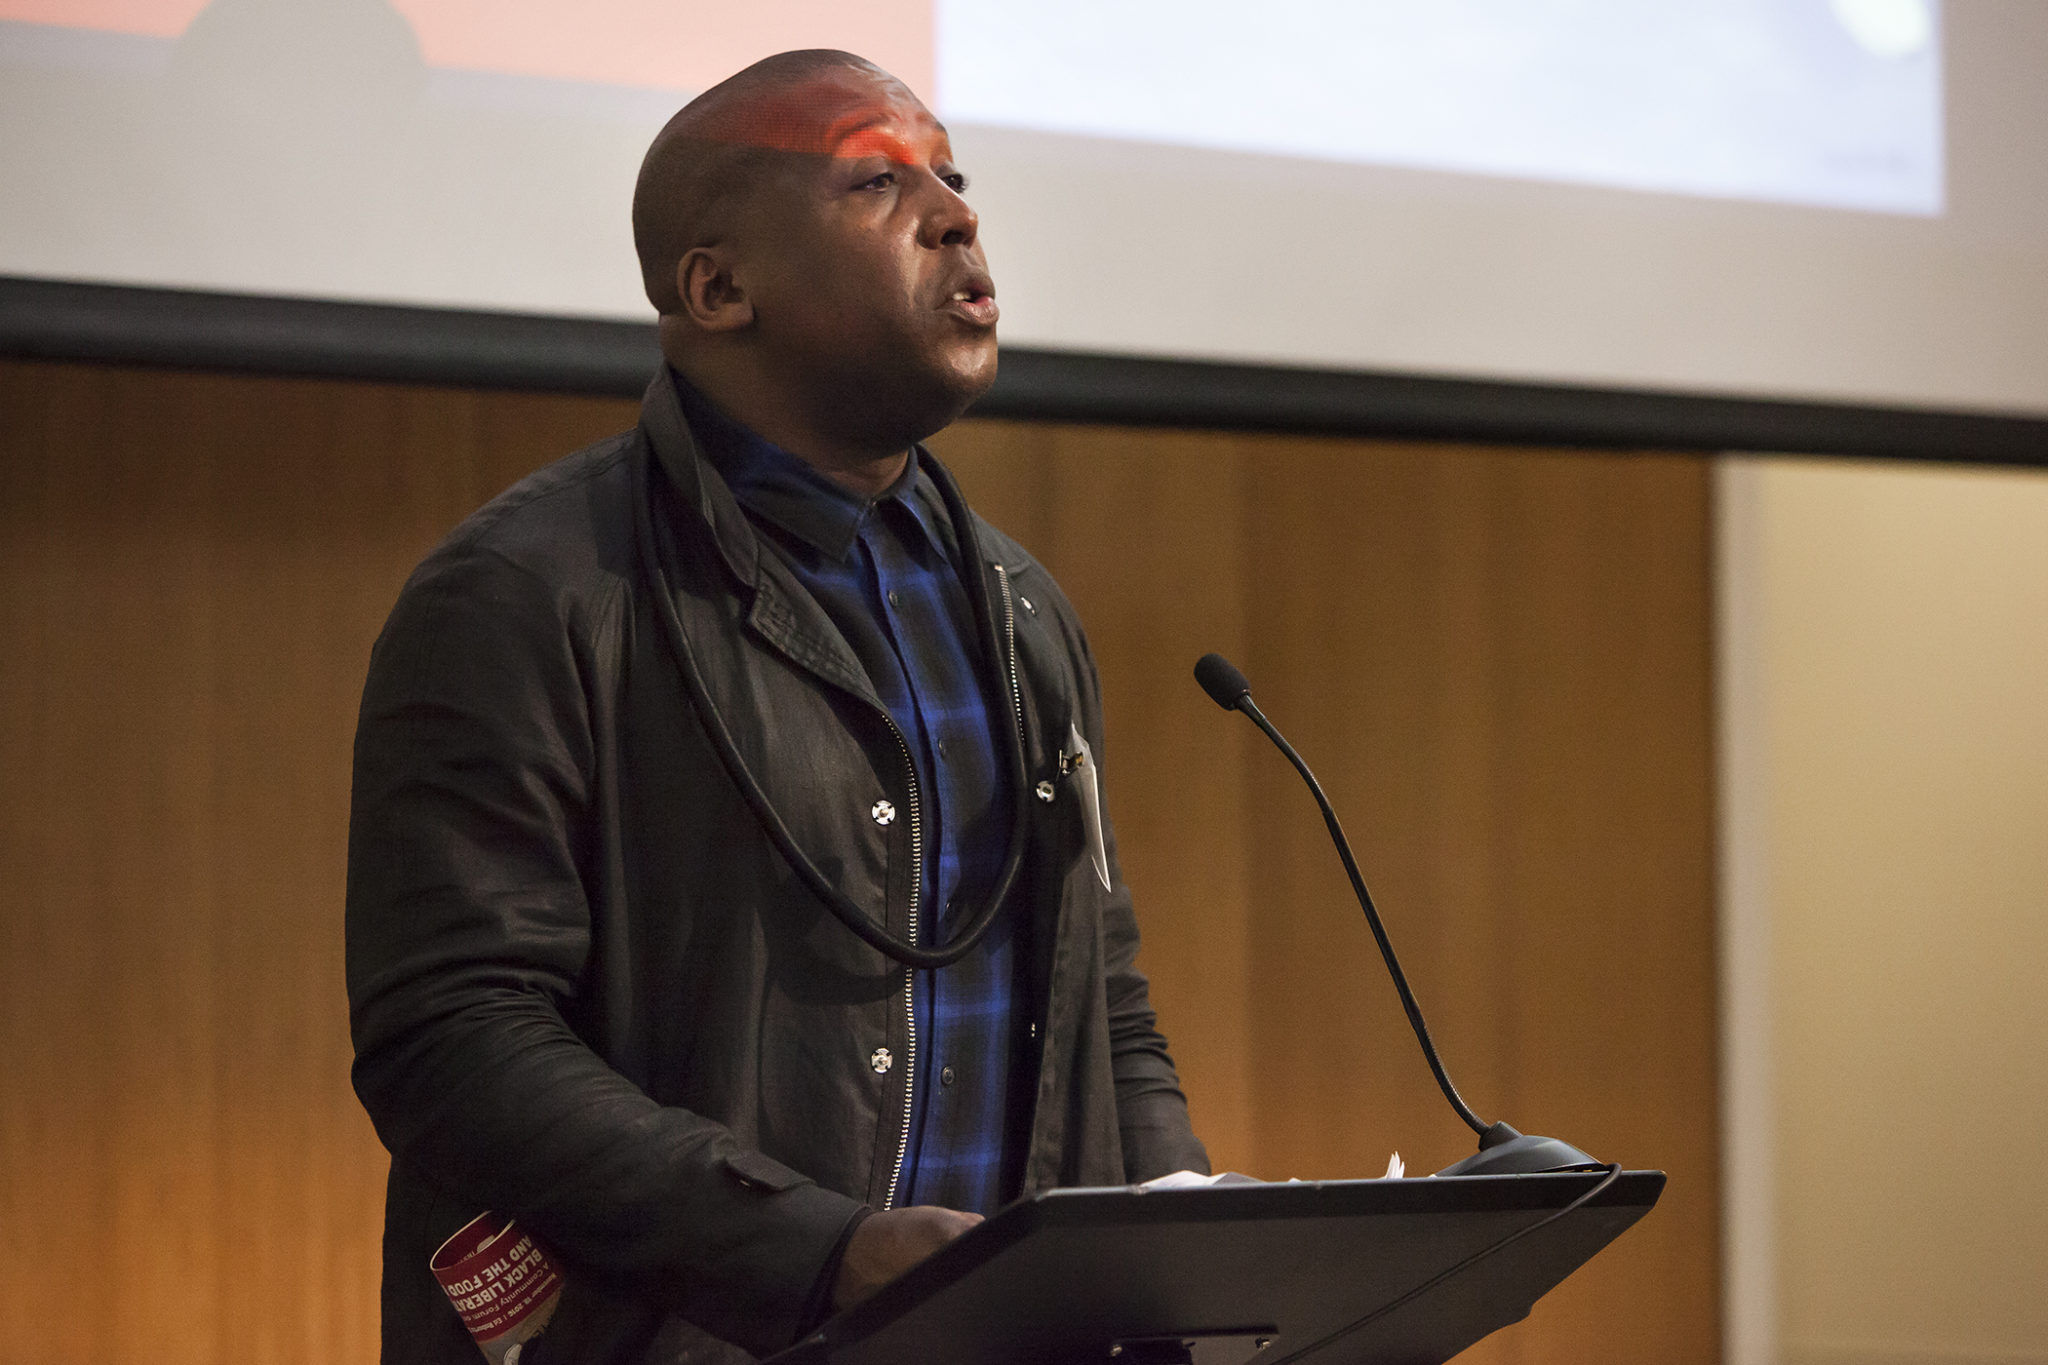 Marvin K. White spoke at Black Liberation and the Food Movement event